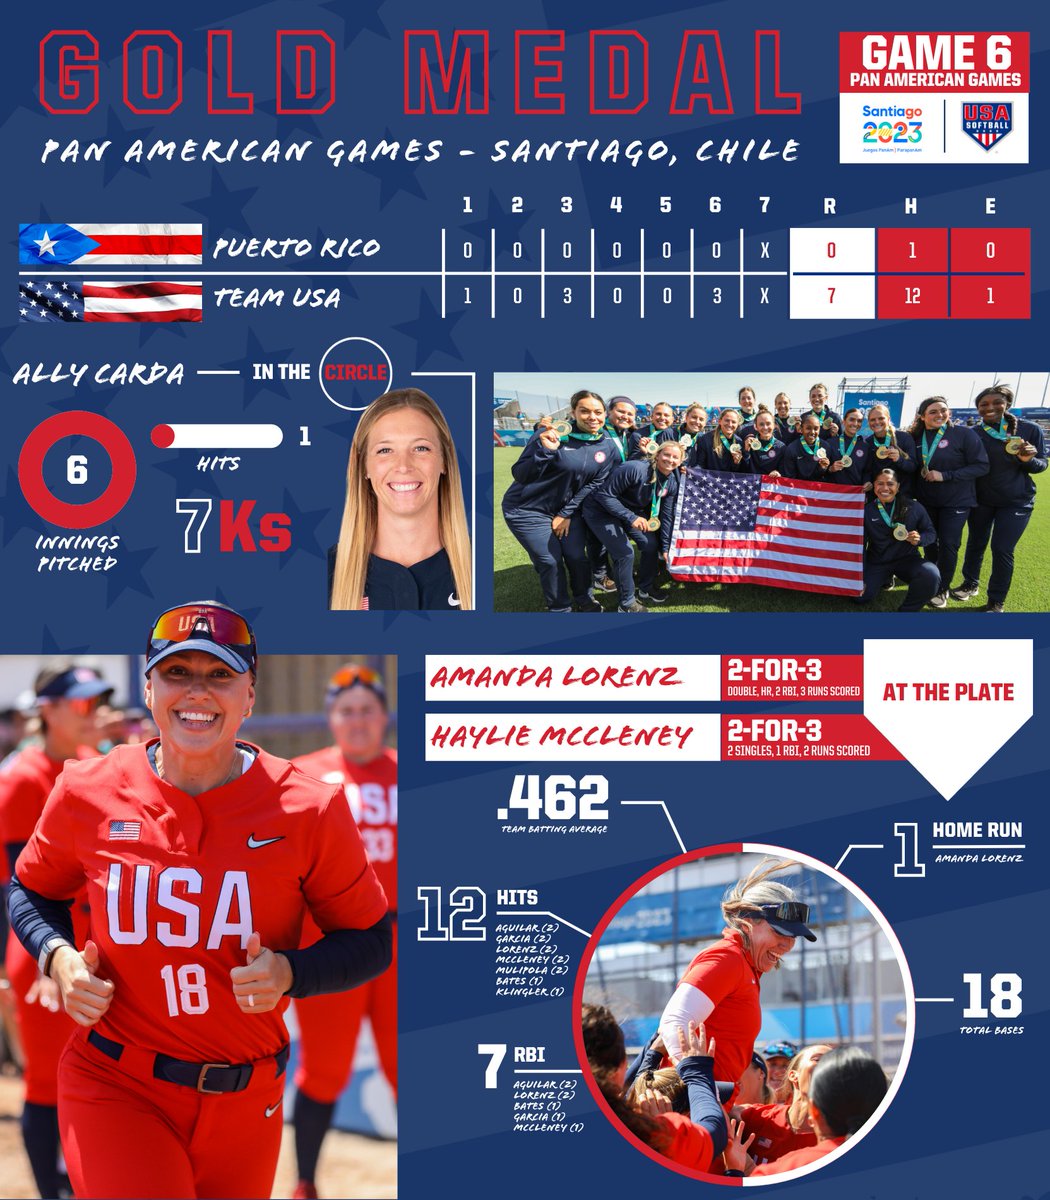 #TeamUSA clinches its 10th Pan American Games 𝗴𝗼𝗹𝗱 𝗺𝗲𝗱𝗮𝗹 behind an 𝙪𝙣𝙙𝙚𝙛𝙚𝙖𝙩𝙚𝙙 6-0 record 🥇 ✭ .432 batting average ✭ 11 home runs ✭ Outscored opponents 60-8 ✭ Overall Pan American Games record improved to 106-5 📰: go.usasoftball.com/40nqSh6